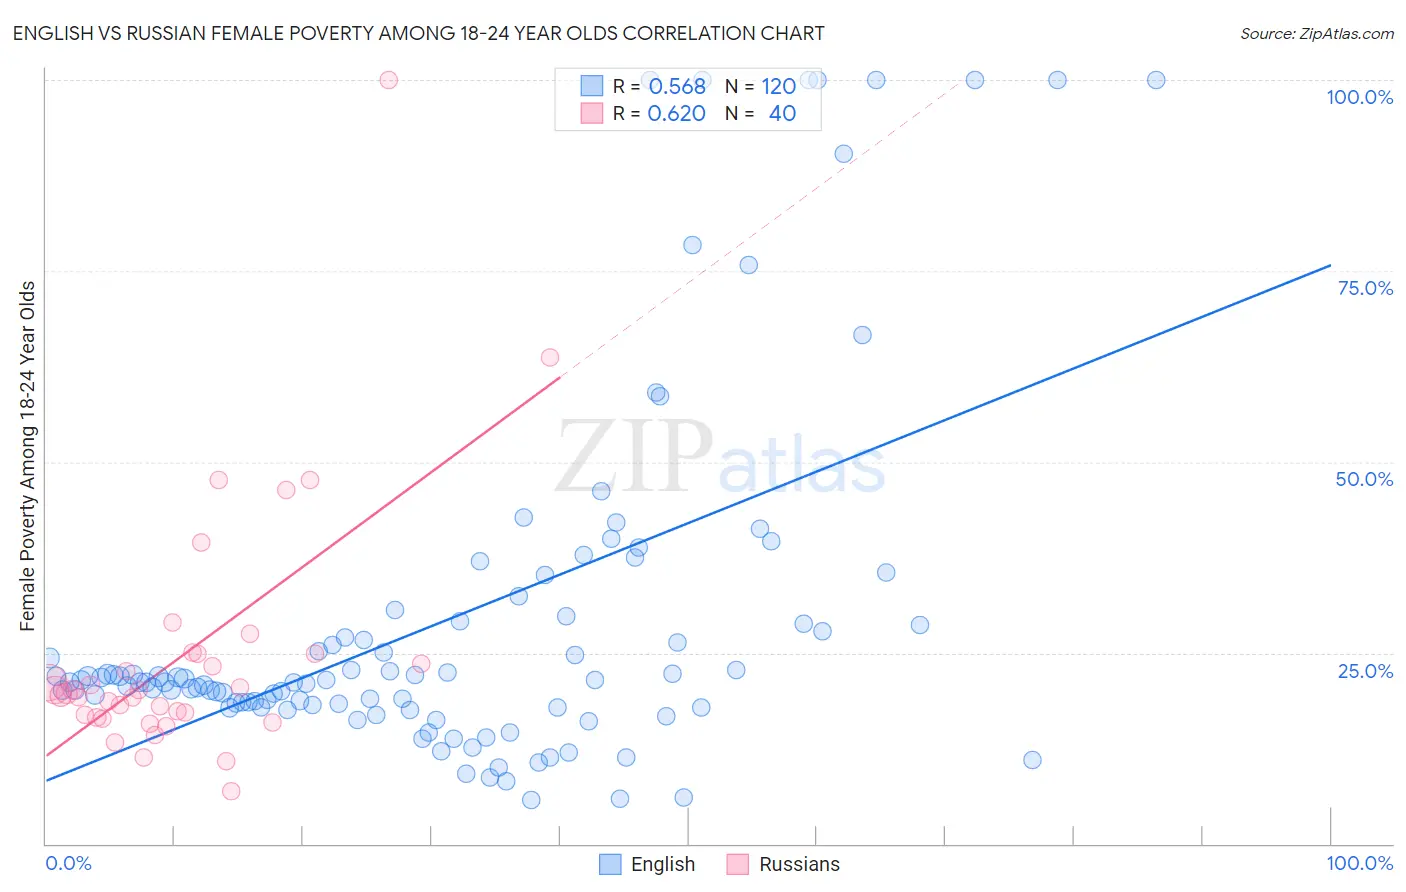 English vs Russian Female Poverty Among 18-24 Year Olds